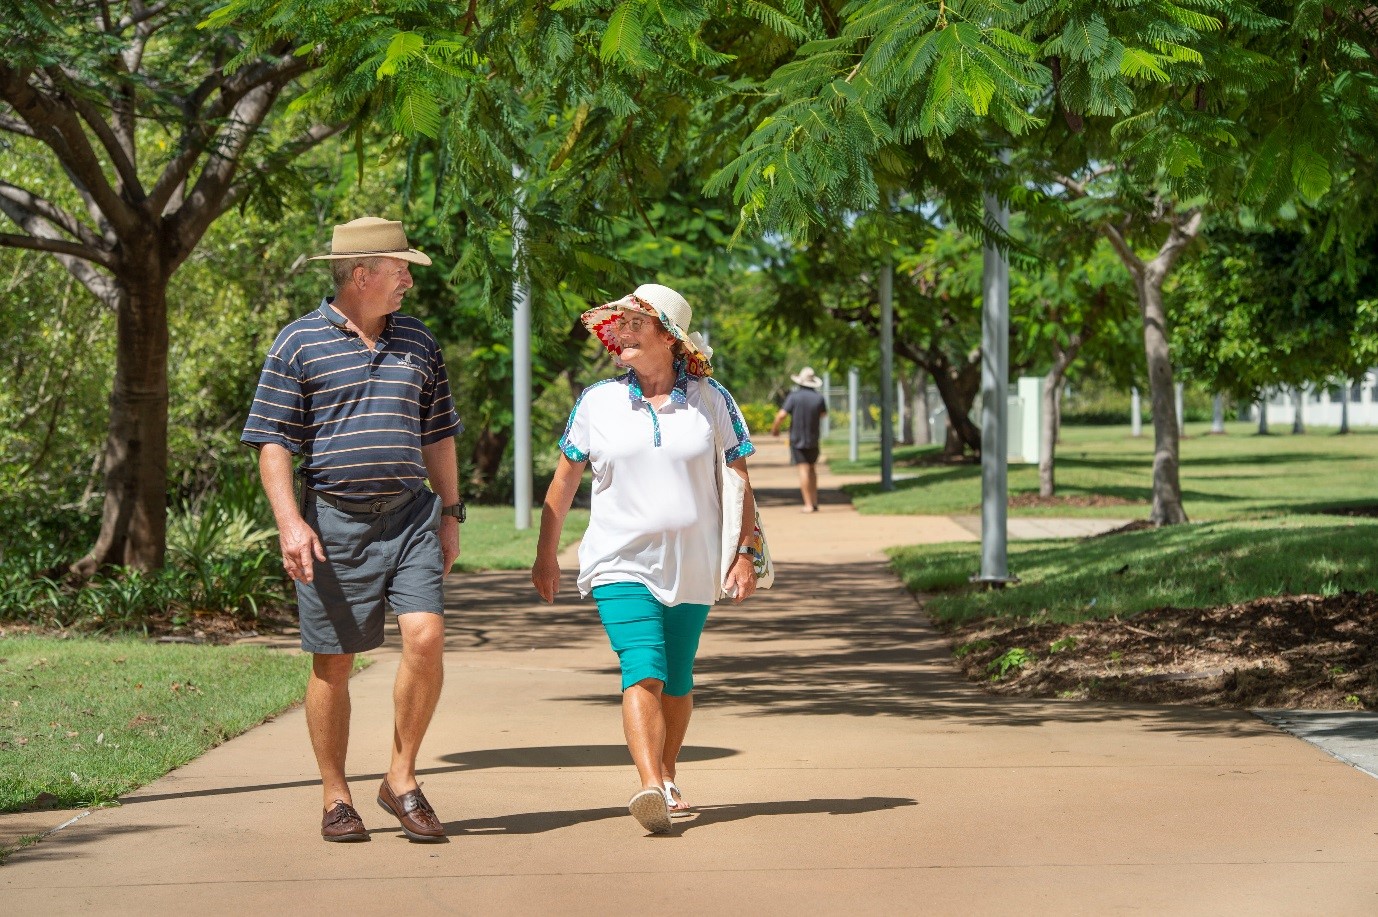 Image of 2 people walking in Townsville